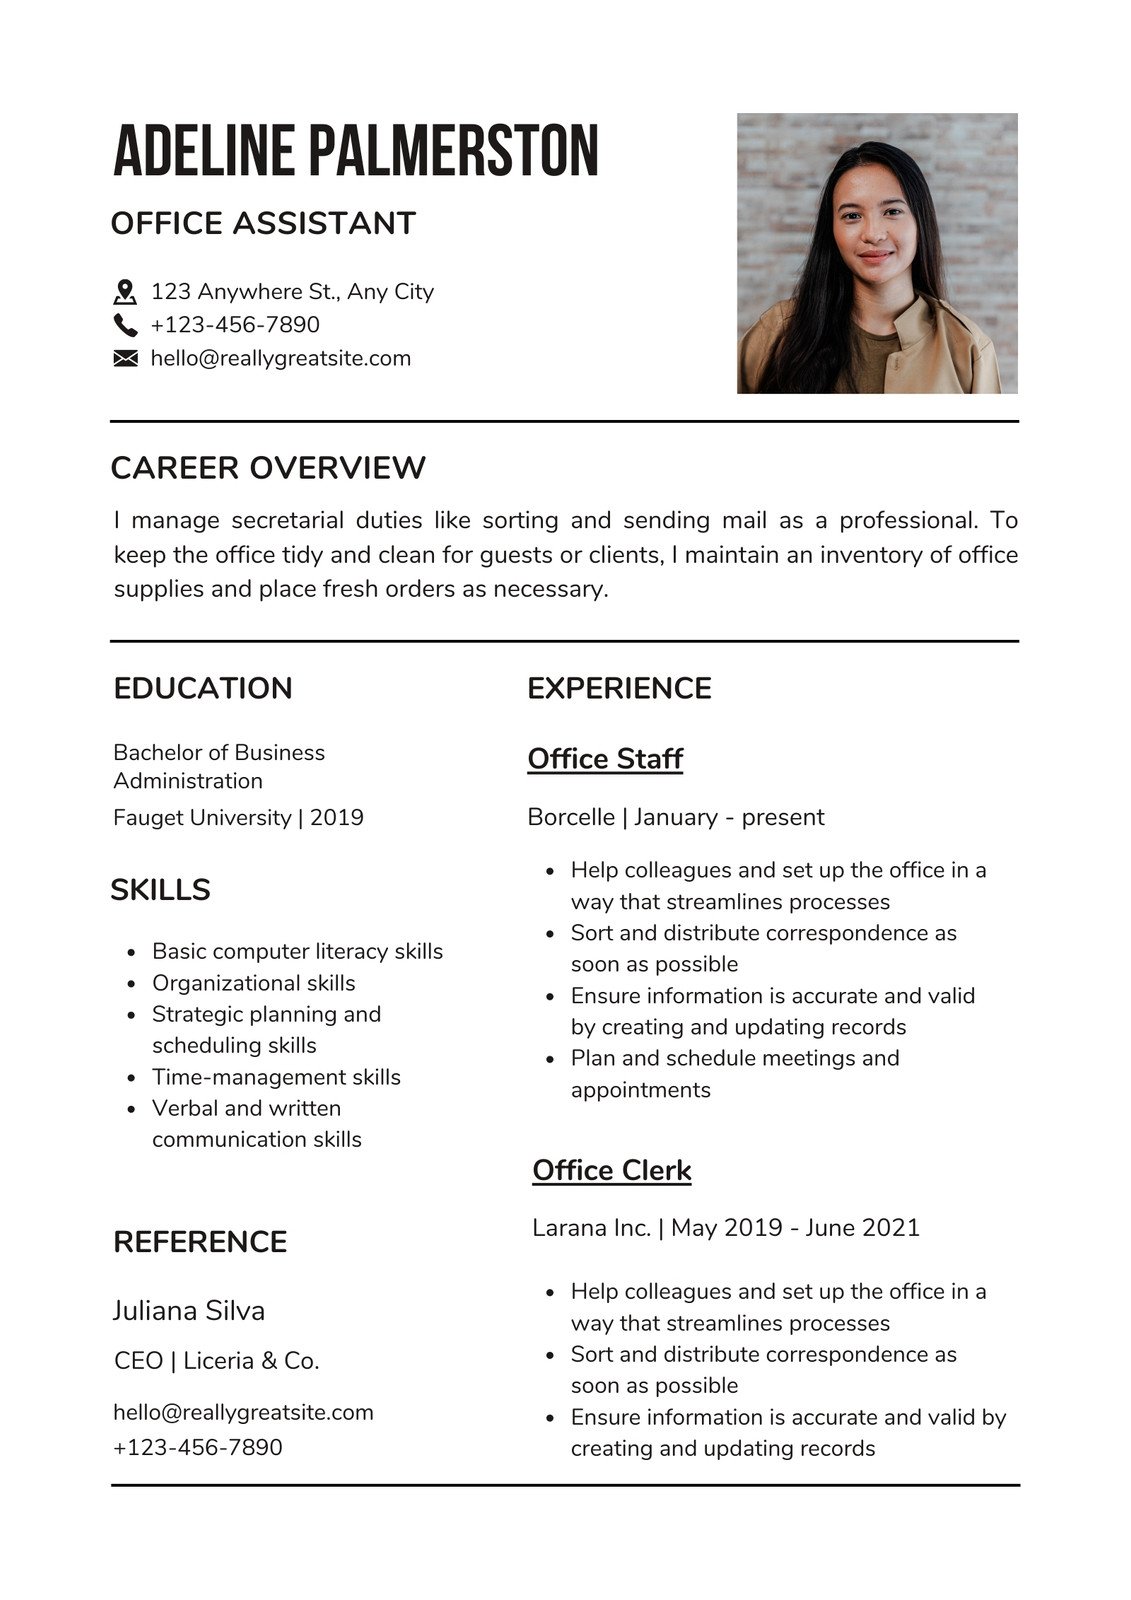 Free Online Resume Builder | Easily create standout resumes